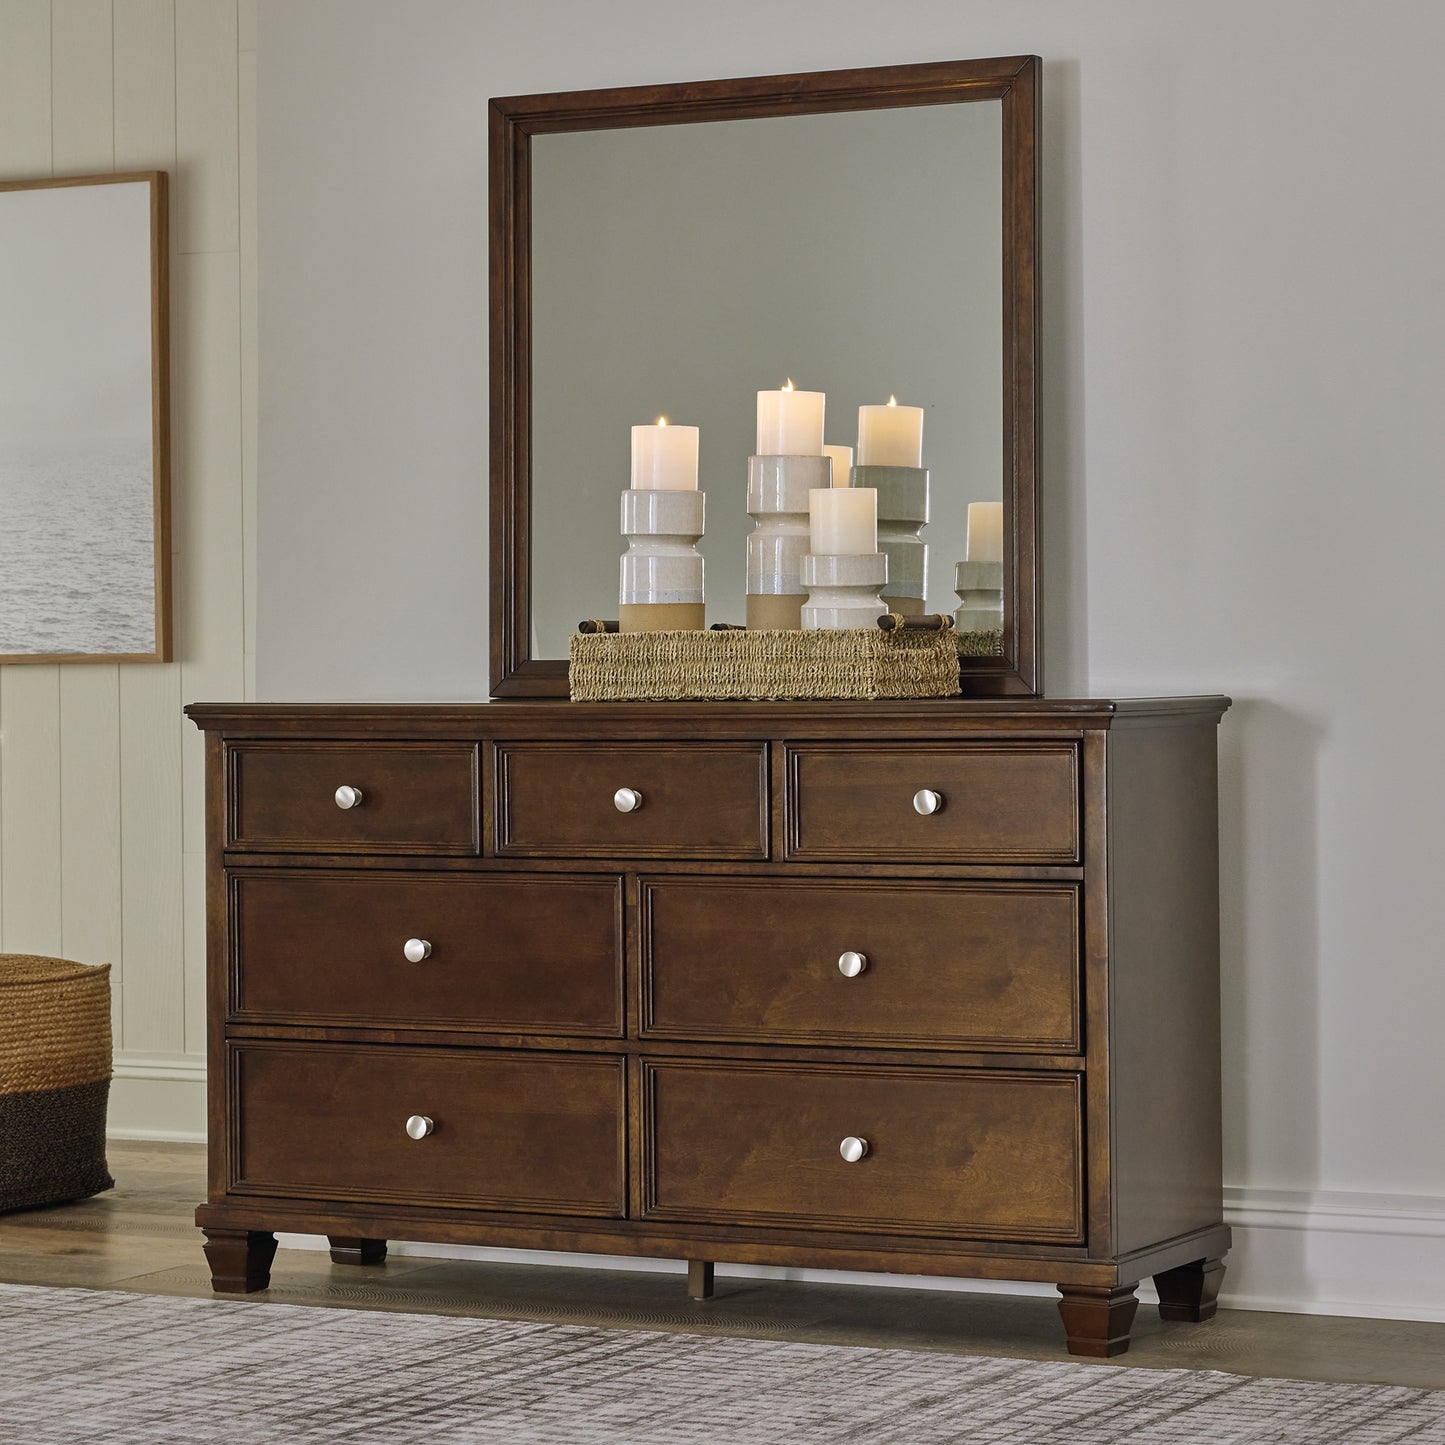 Danabrin Twin Panel Bed with Mirrored Dresser, Chest and Nightstand JB's Furniture  Home Furniture, Home Decor, Furniture Store